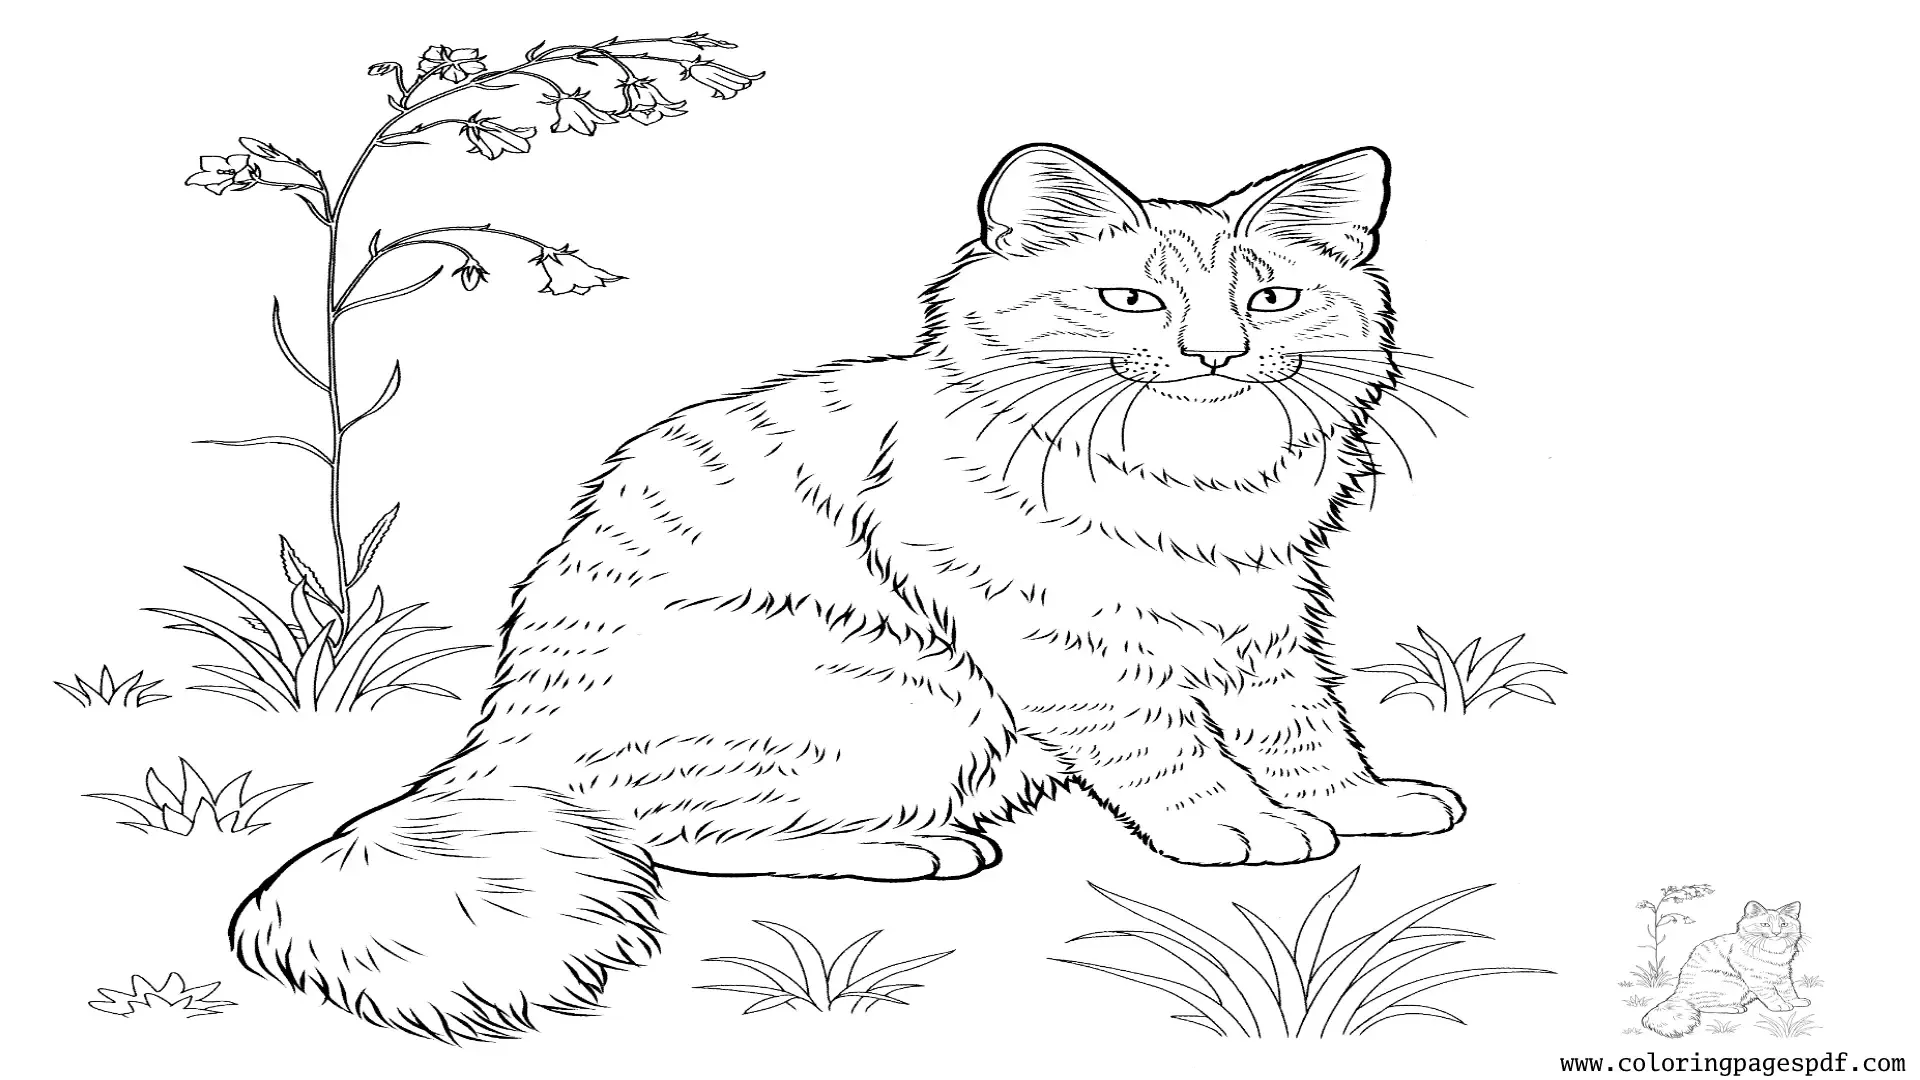 Coloring Page Of A Long Haired Cat